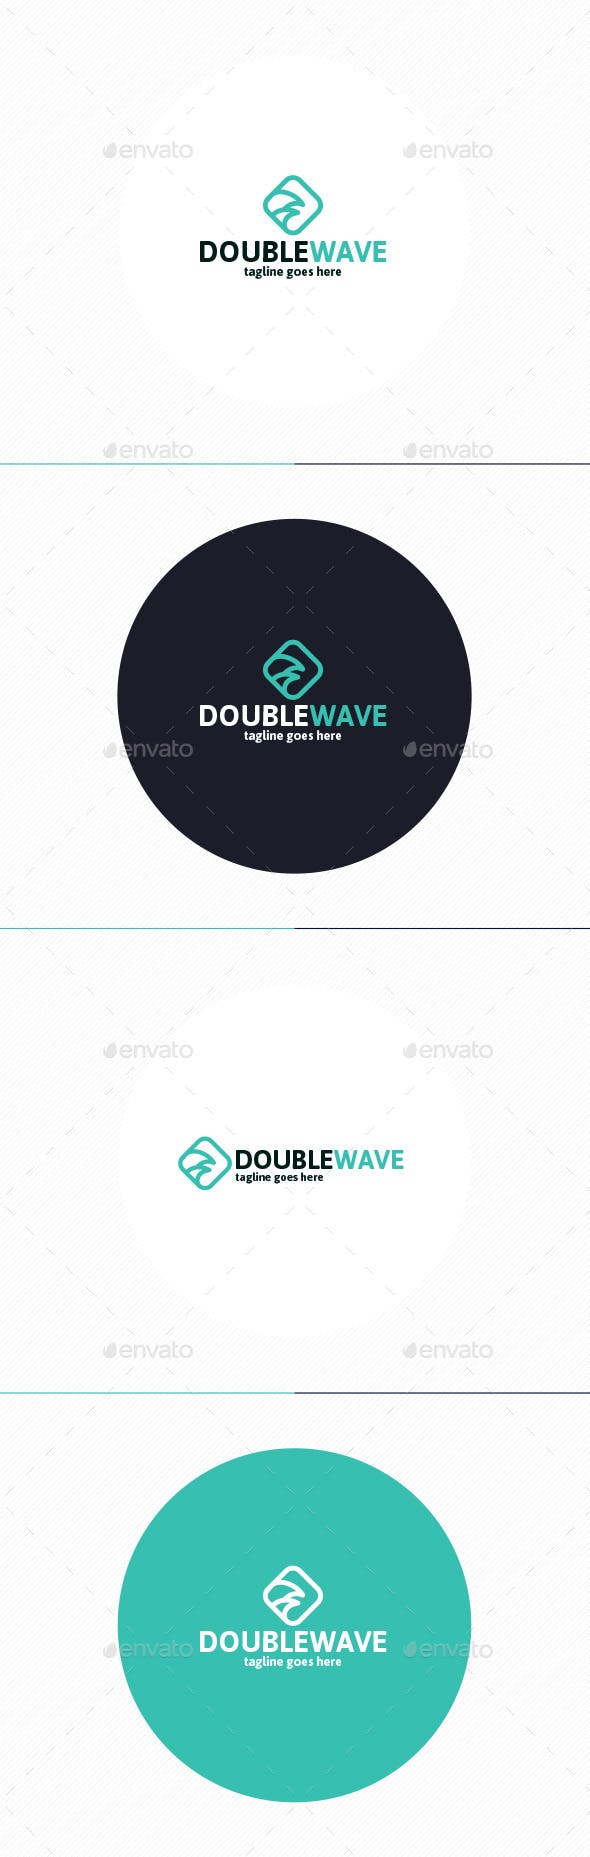 Double Wave Logo - Double Wave Logo by shaoleen | GraphicRiver